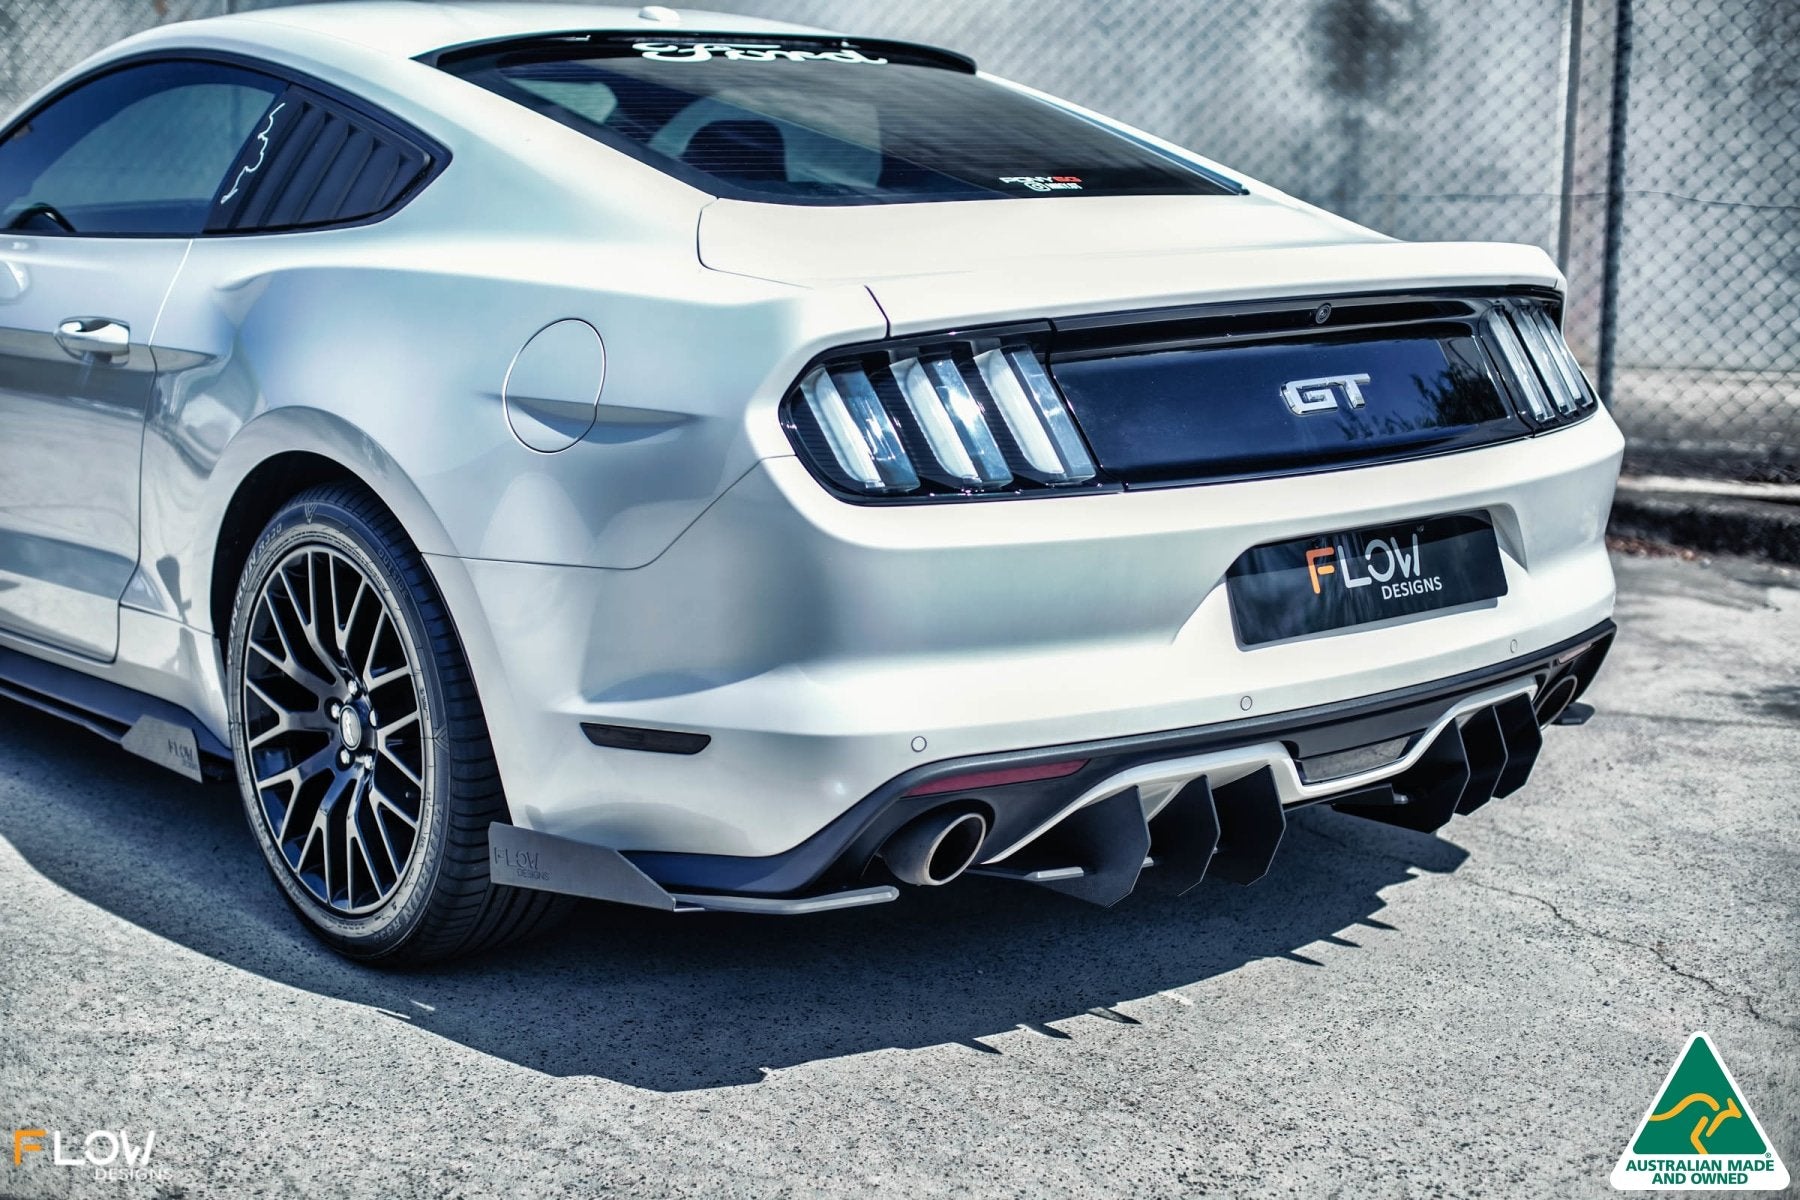 GT Mustang S550 FM Rear Spat Winglets (Pair) - MODE Auto Concepts